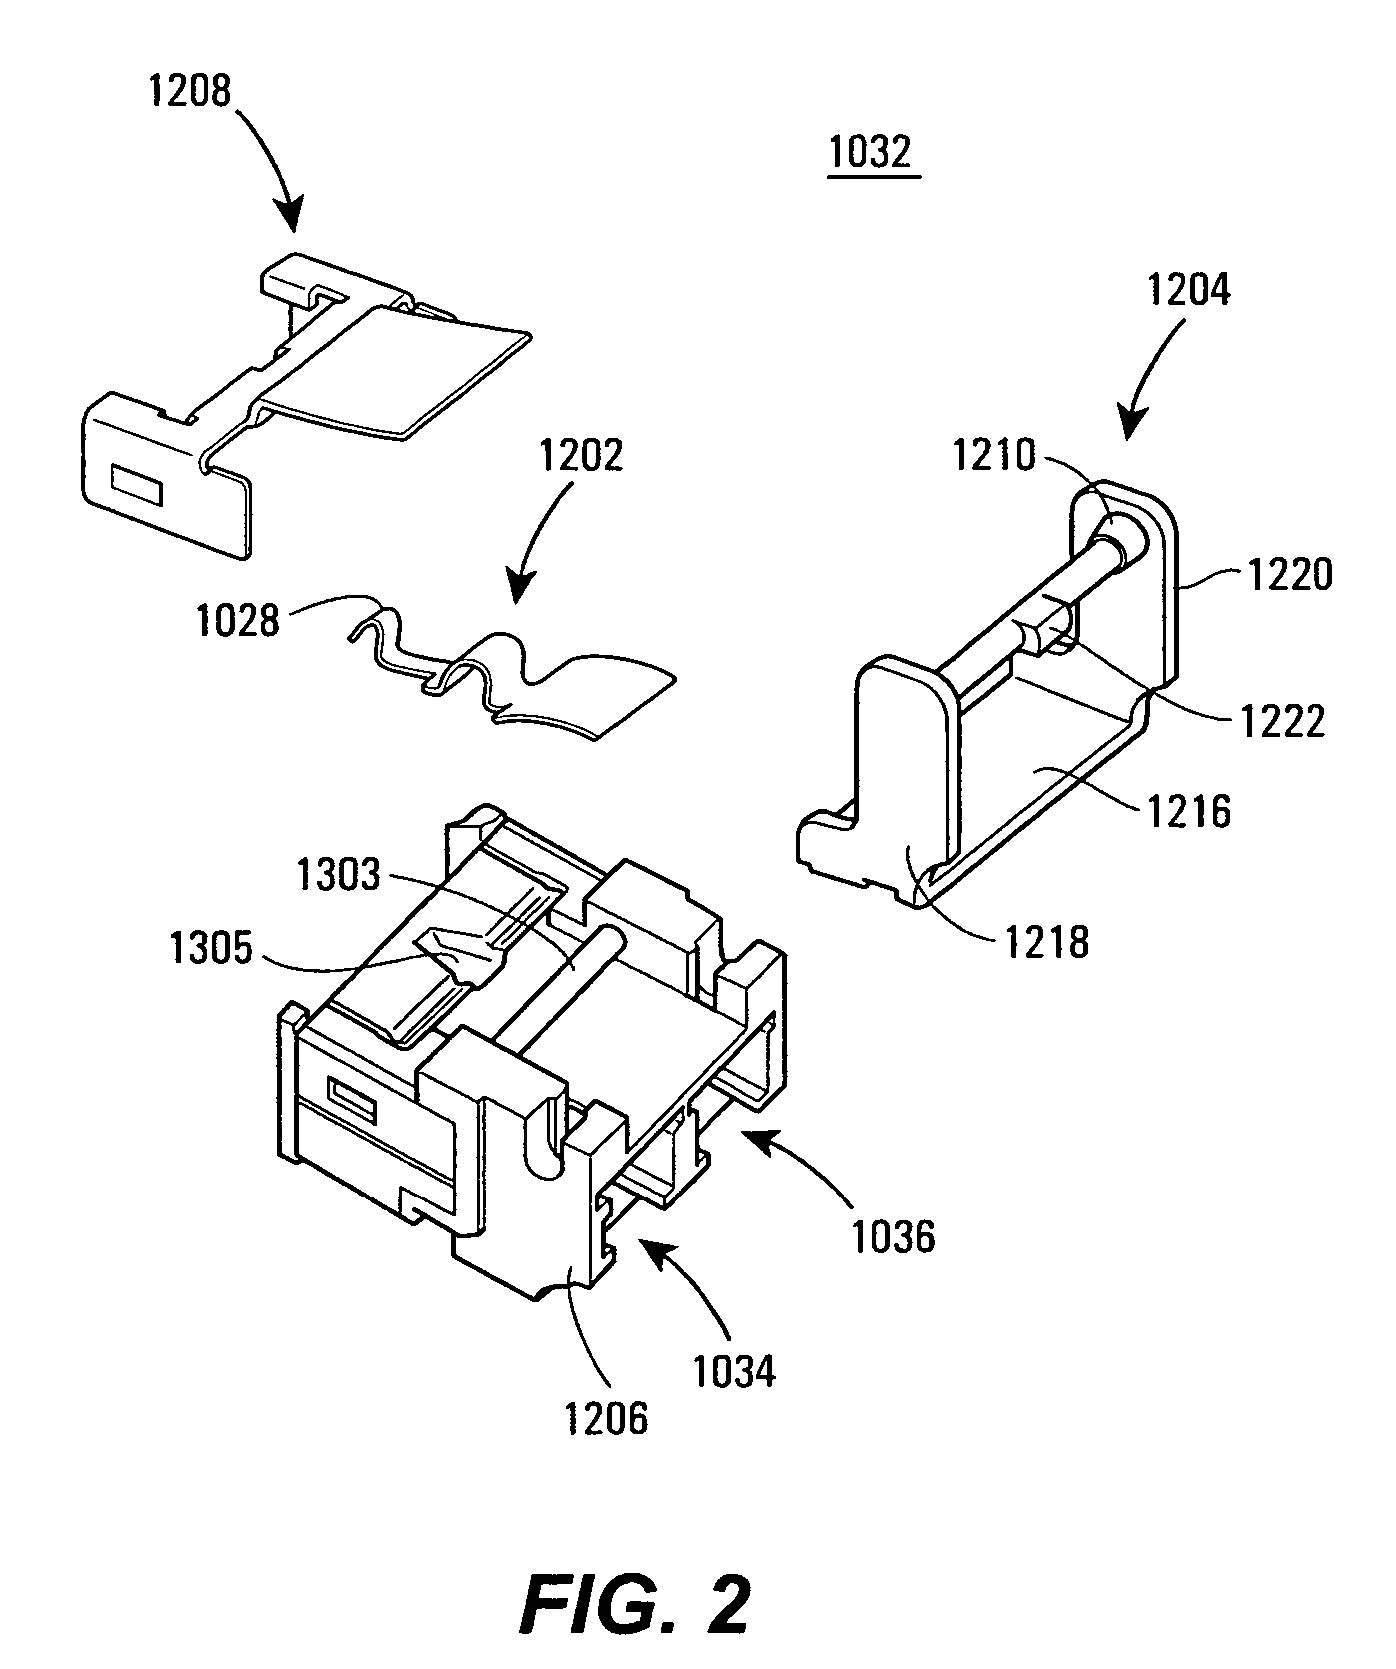 Optical module with latching/delatching mechanism